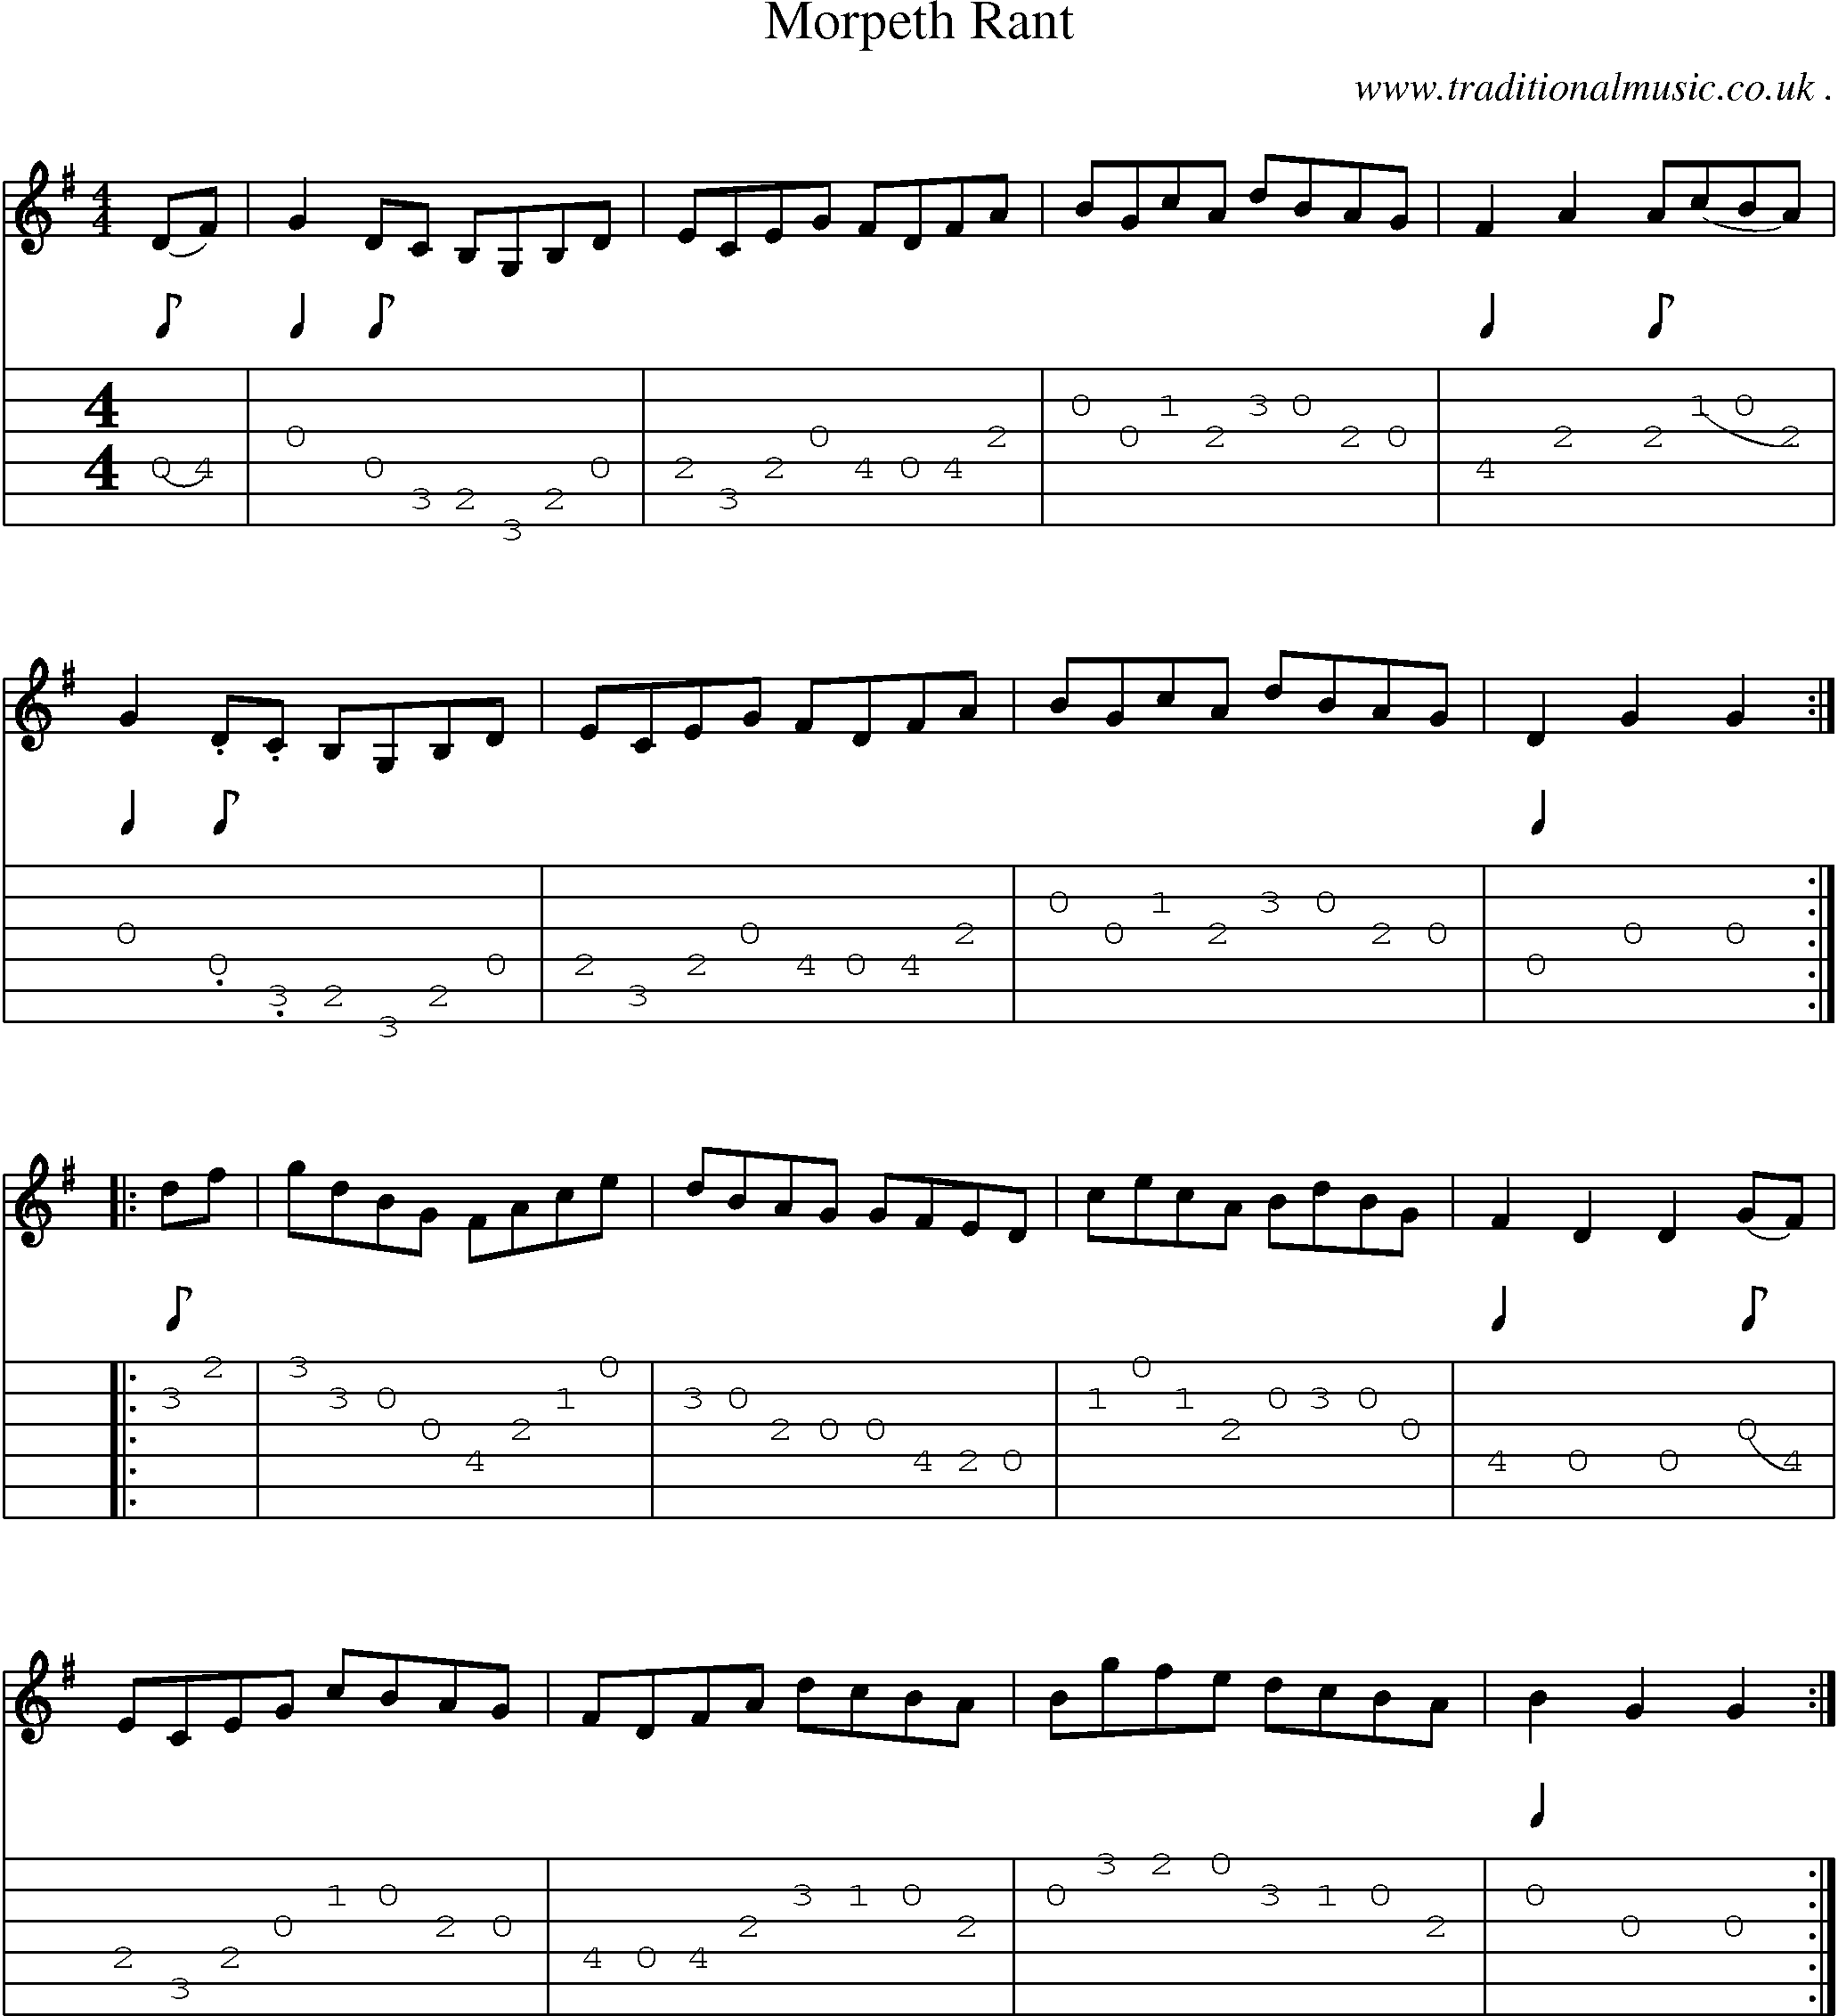 Sheet-Music and Guitar Tabs for Morpeth Rant